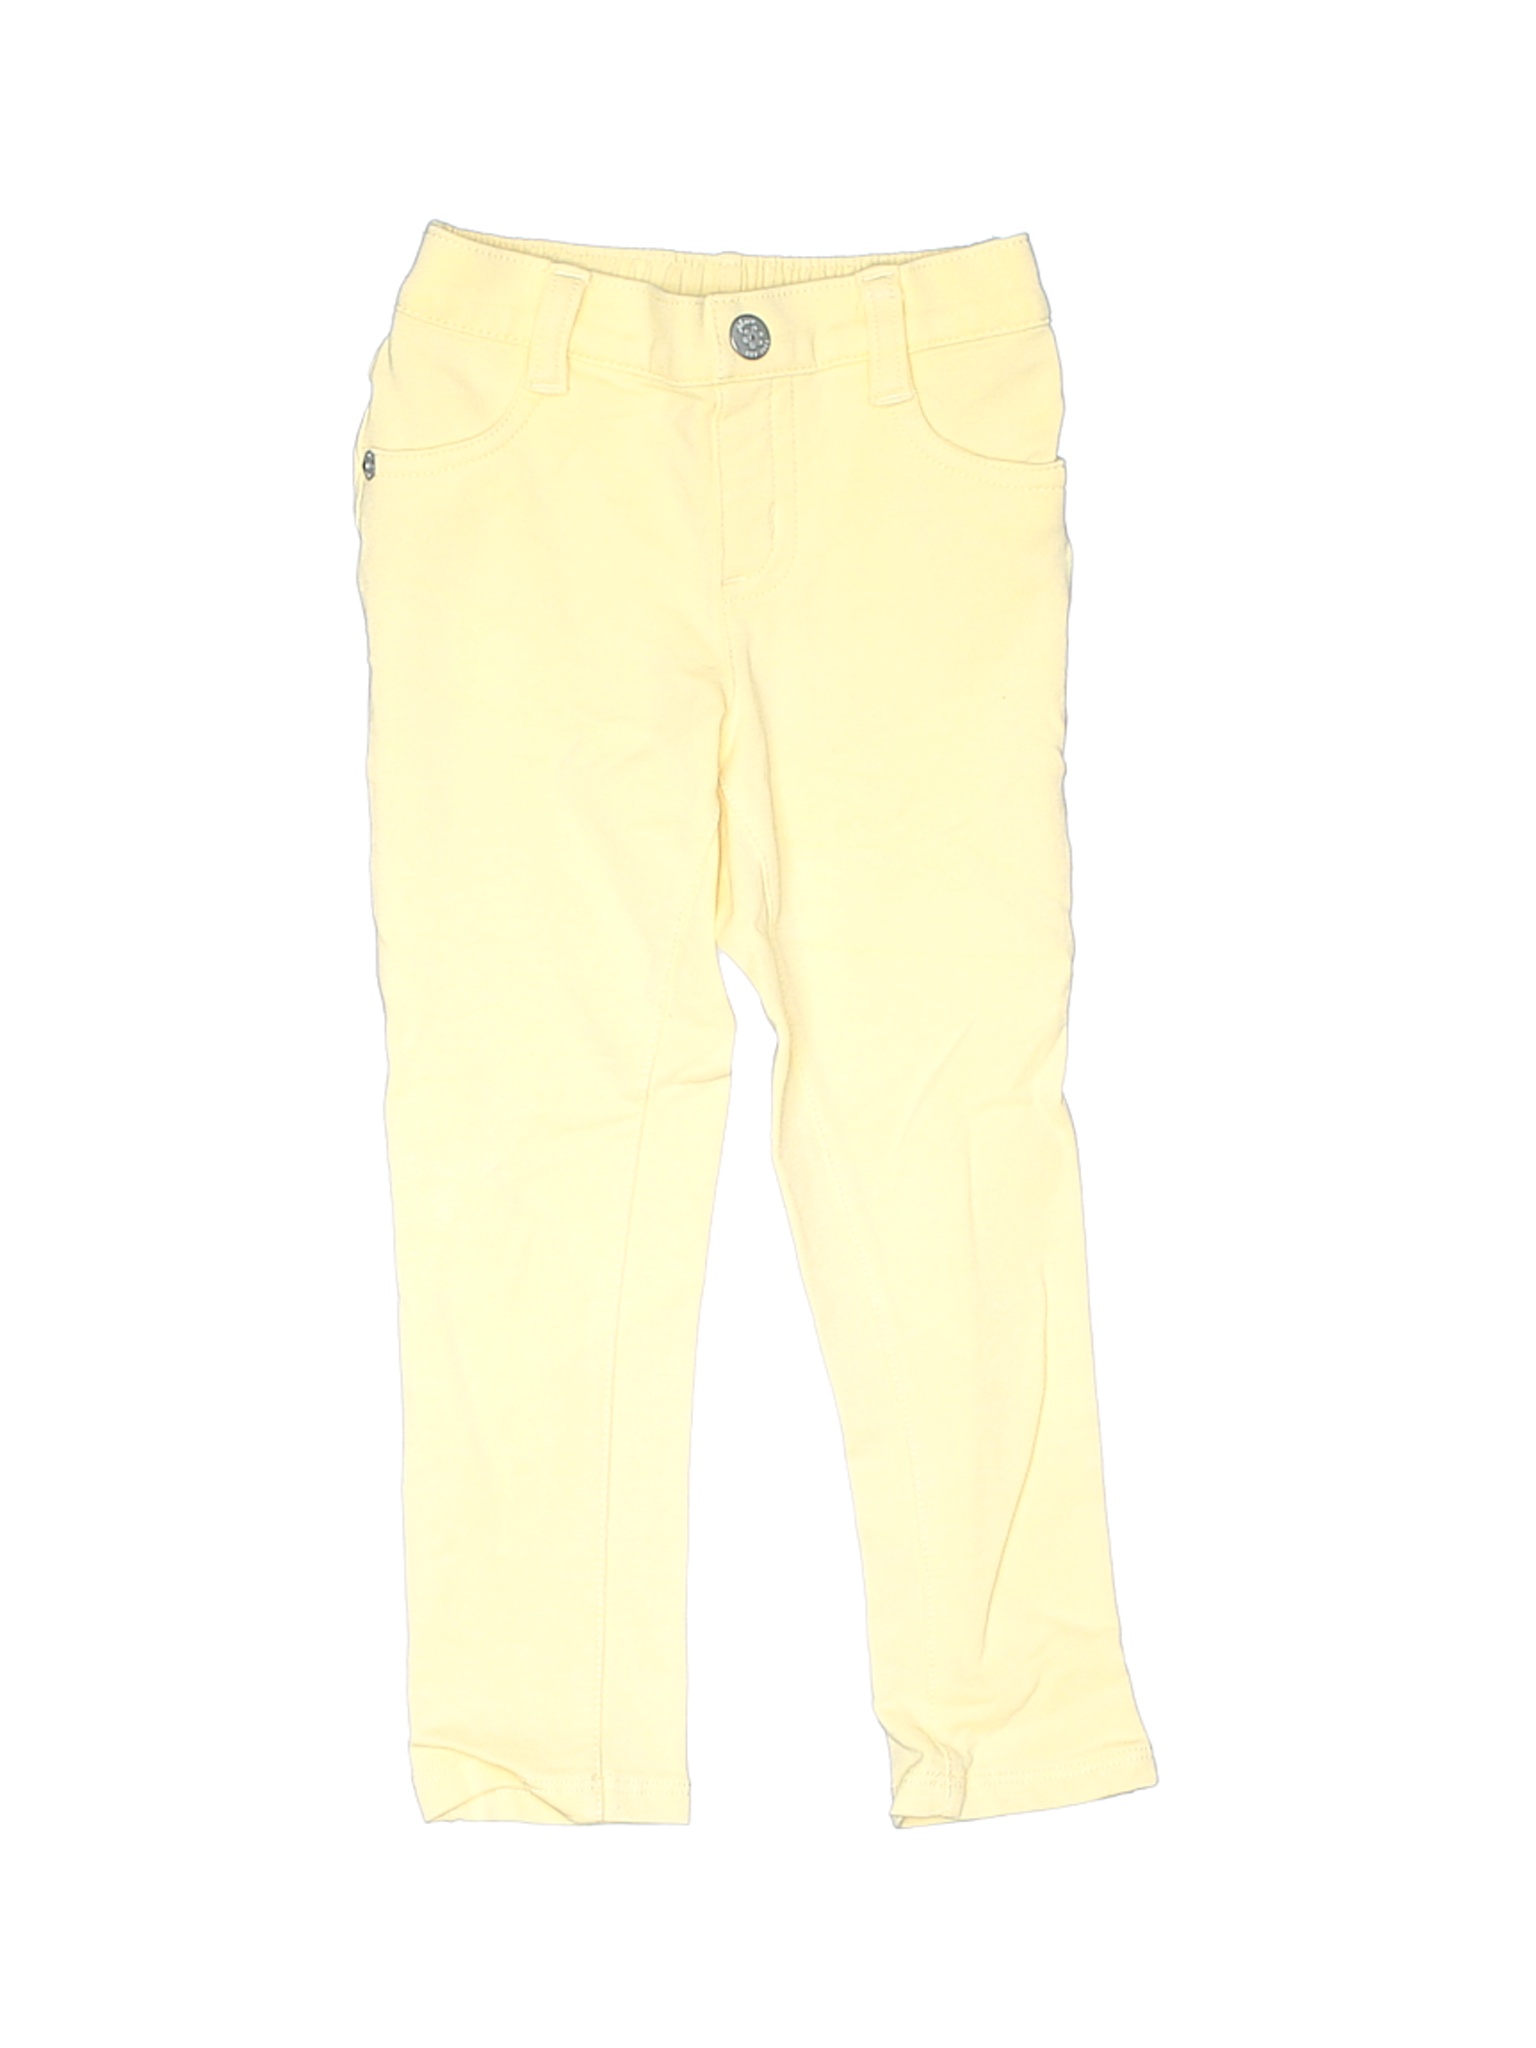 The Children's Place Girls Yellow Casual Pants 3T | eBay